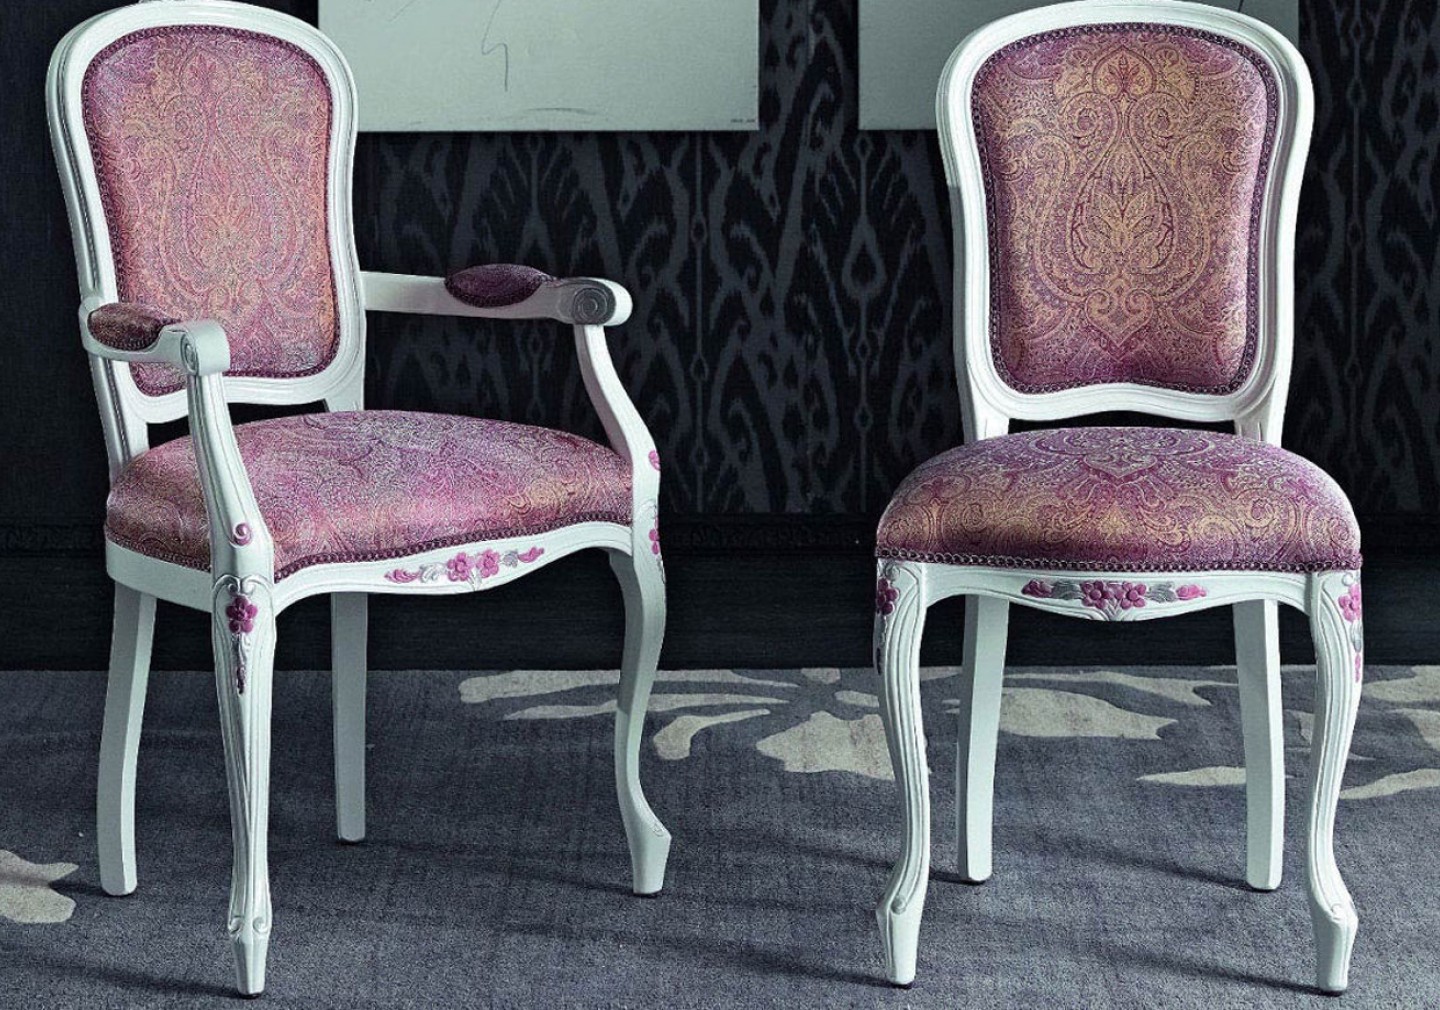 THE VERONA CLASSIC DINING CHAIR